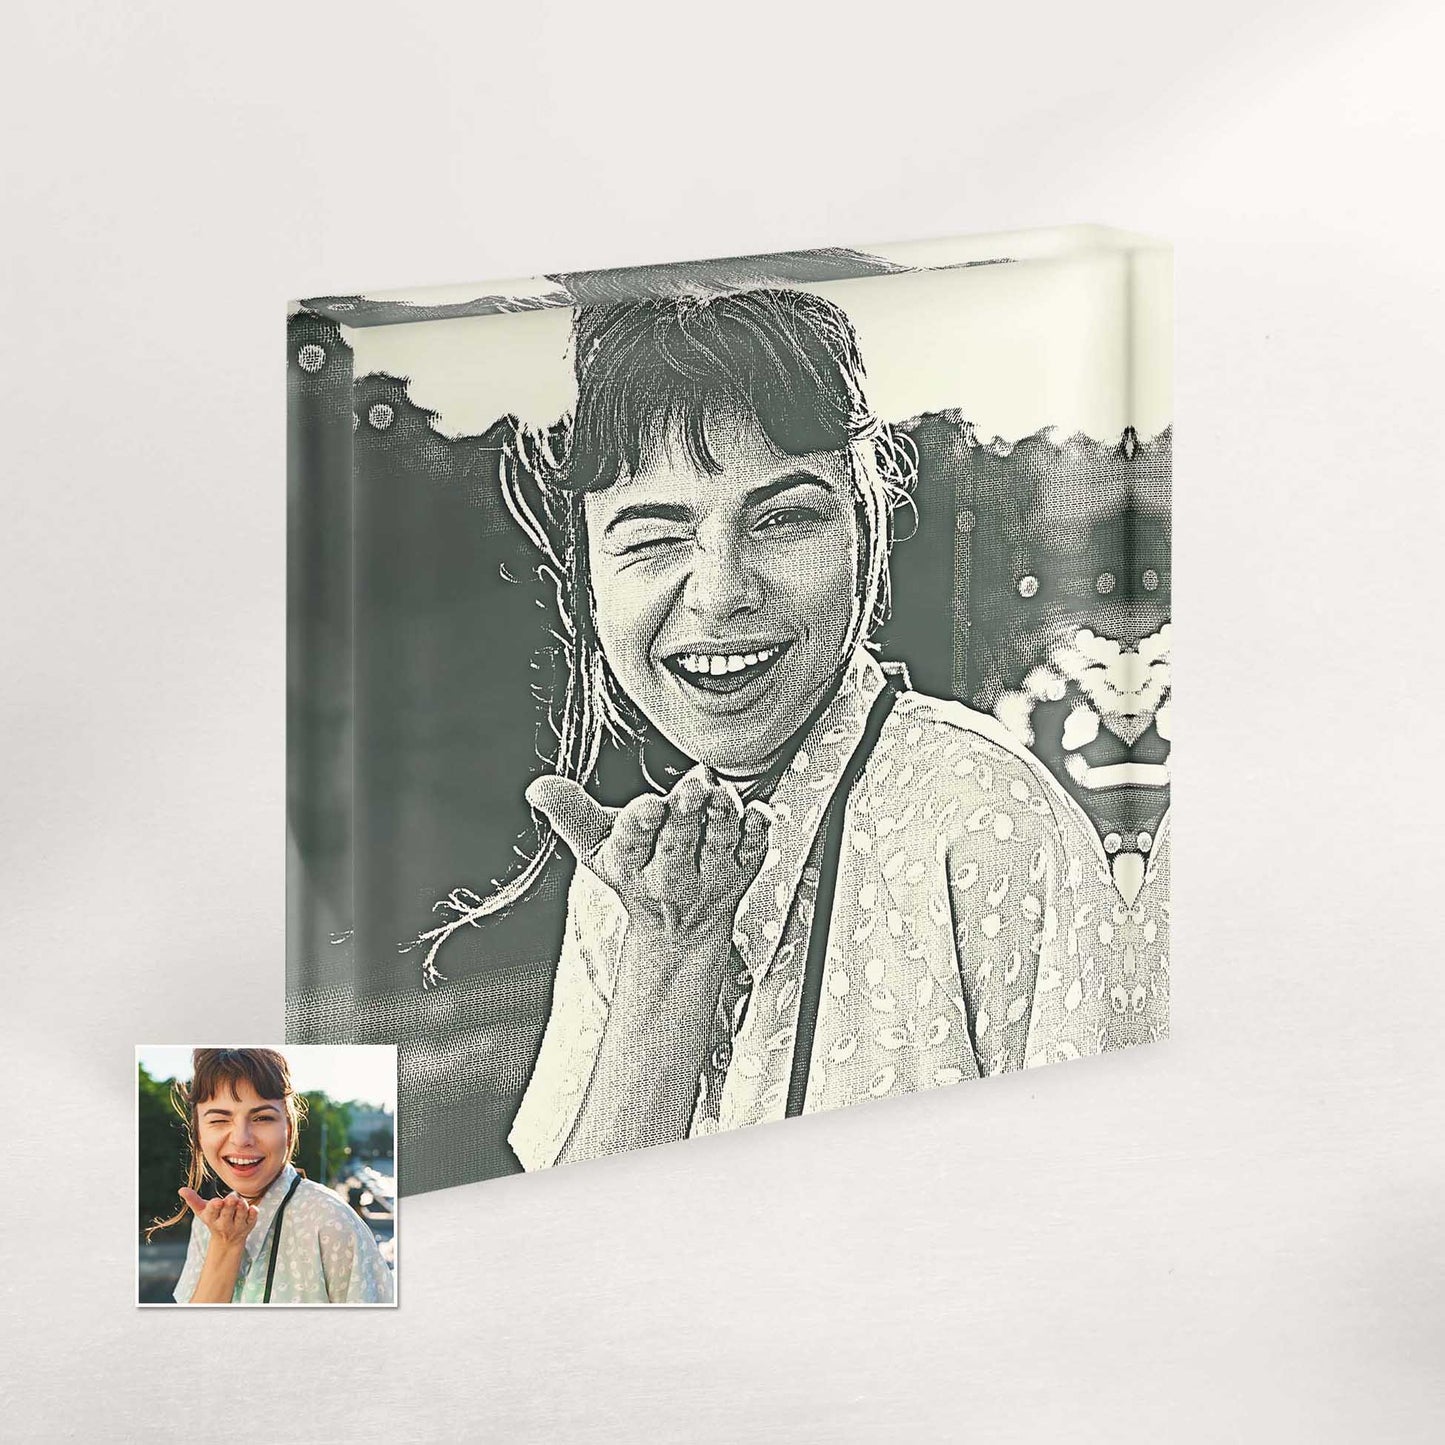 Unleash your creativity with our personalised Money Engraved Acrylic Block Photo. Customised from your photo, it features an intricate engraving of money, creating a visually captivating and unique artwork that will impress anyone who receives it.